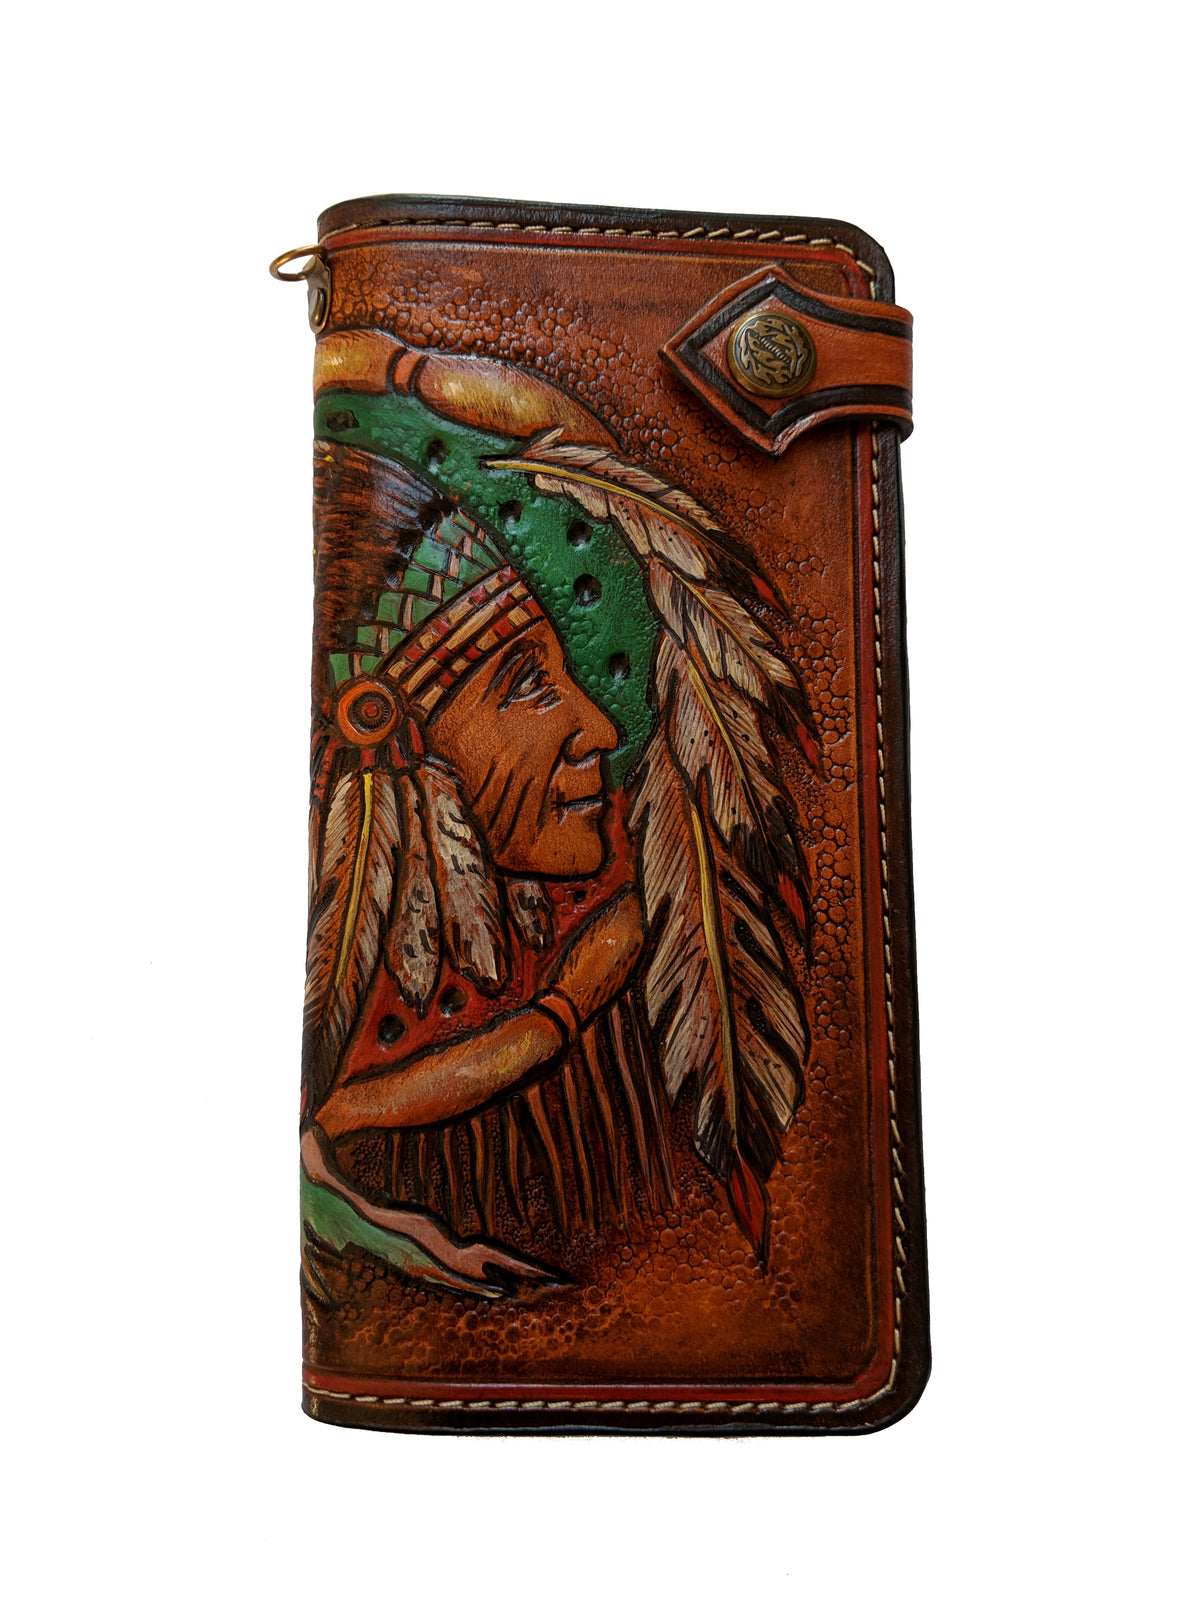 Q4, Native American Indian Chief Head, Red Man, Apache, Ethnic